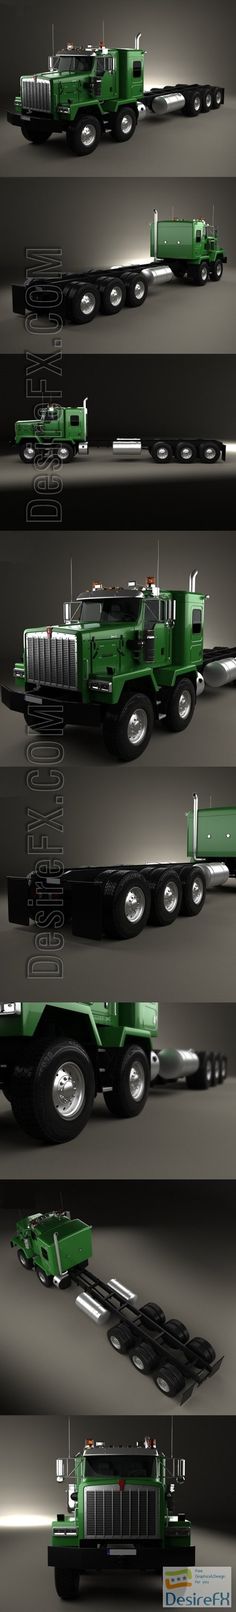 KENWORTH C500 CHASSIS TRUCK 5AXLE 2001 3D MODEL